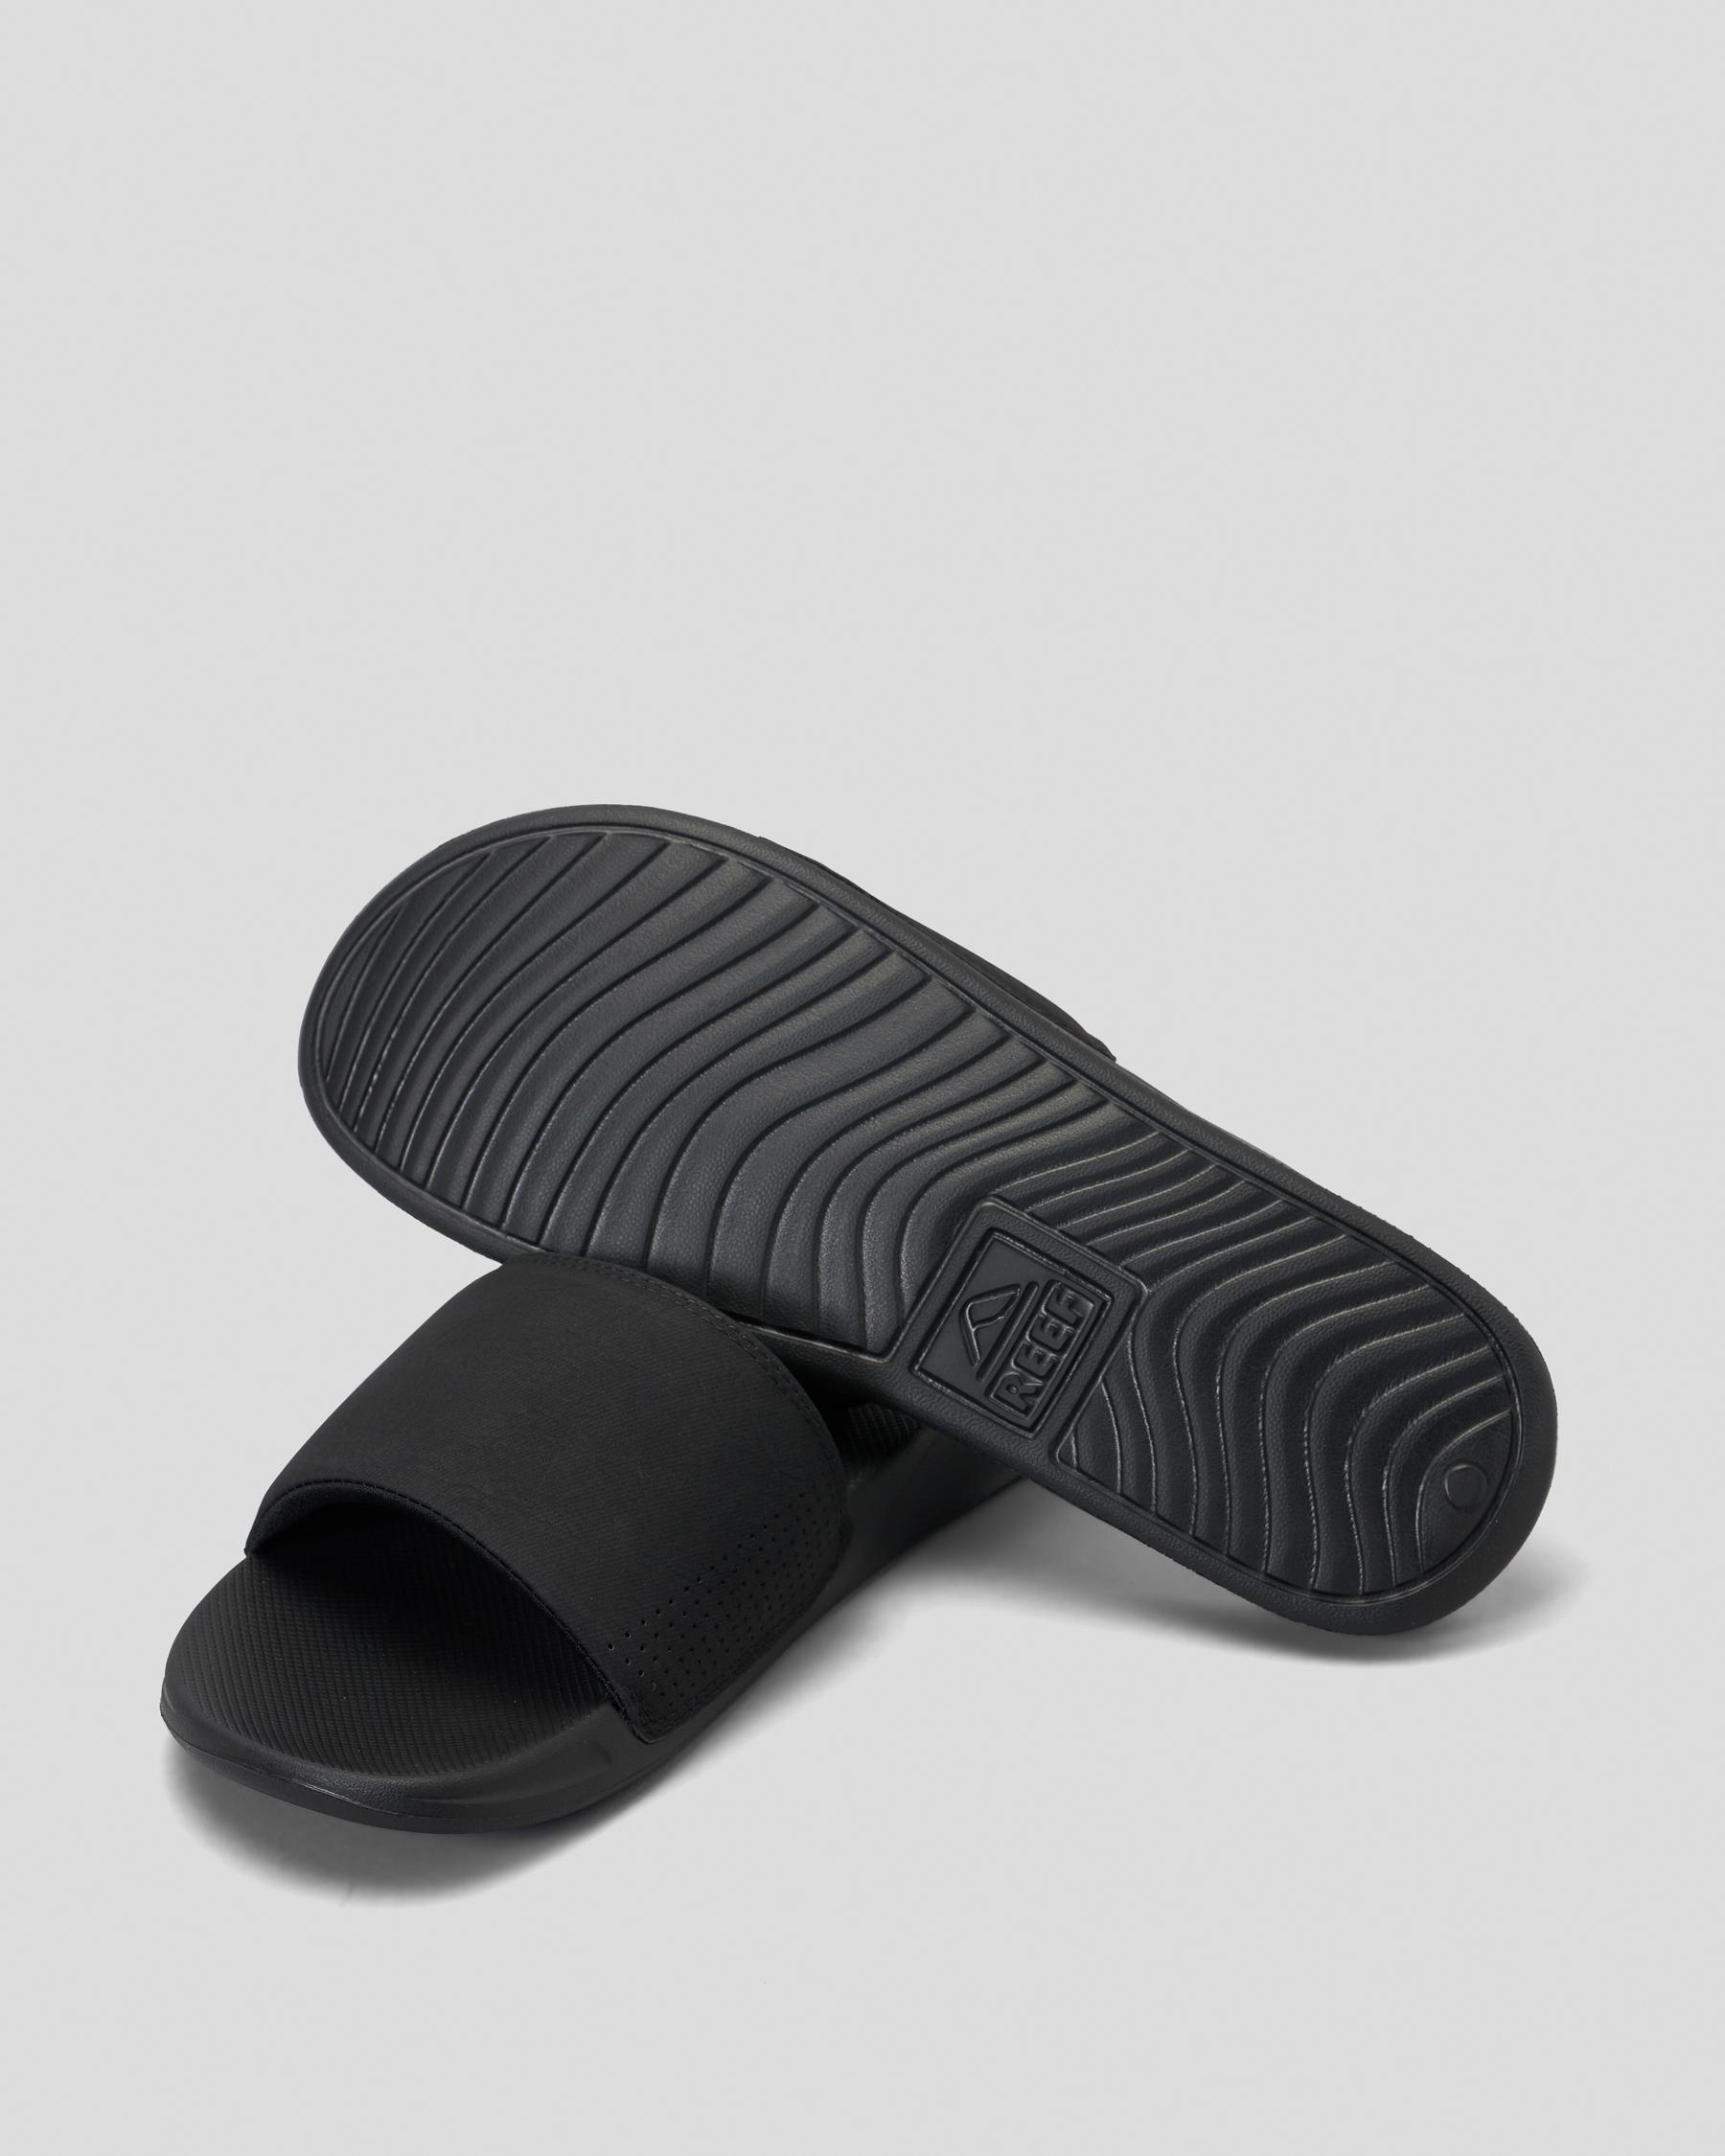 Shop Reef One Slides In Black - Fast Shipping & Easy Returns - City ...